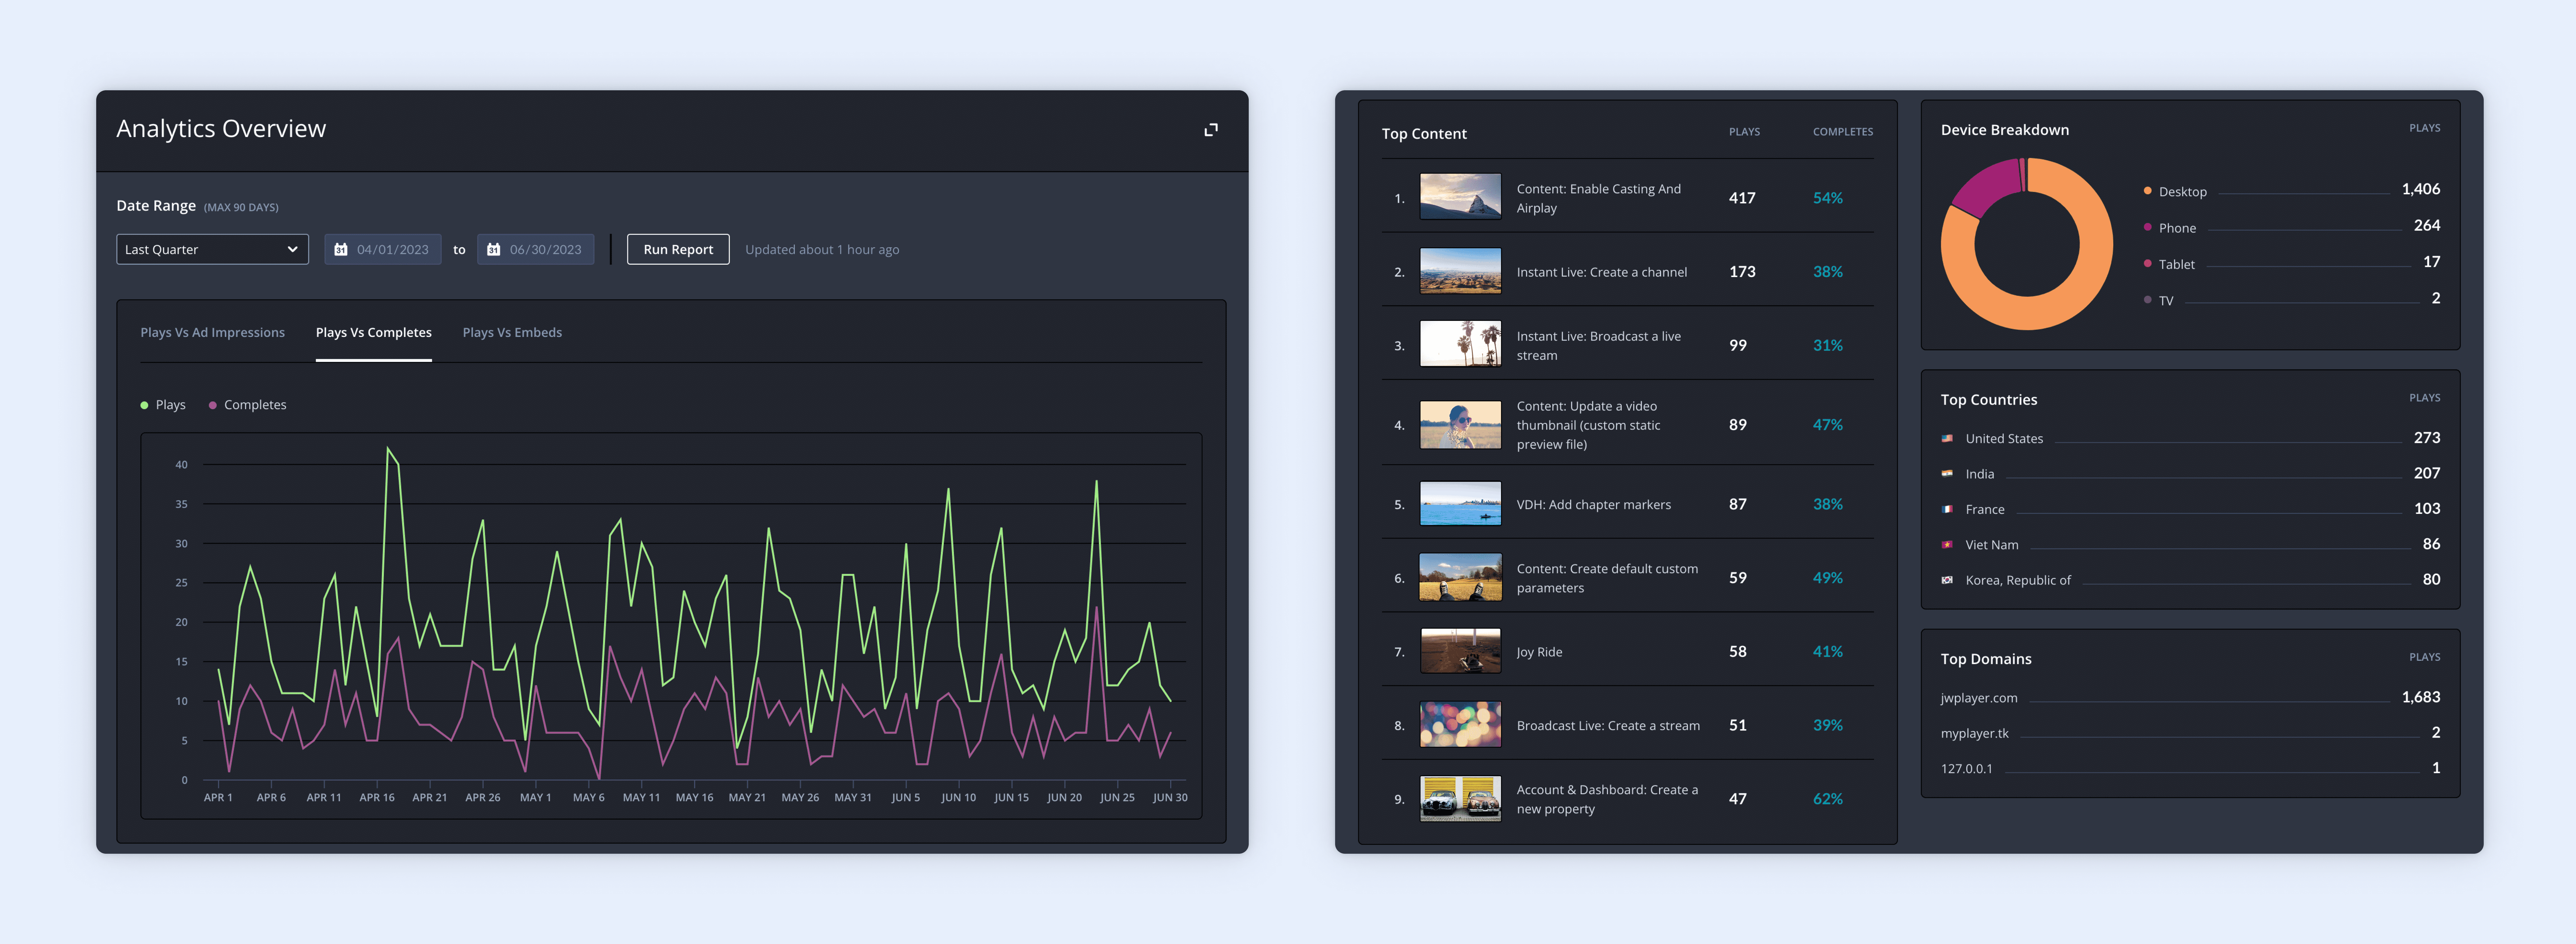 Analytics Overview UI showcasing graphs and ranked lists for media content